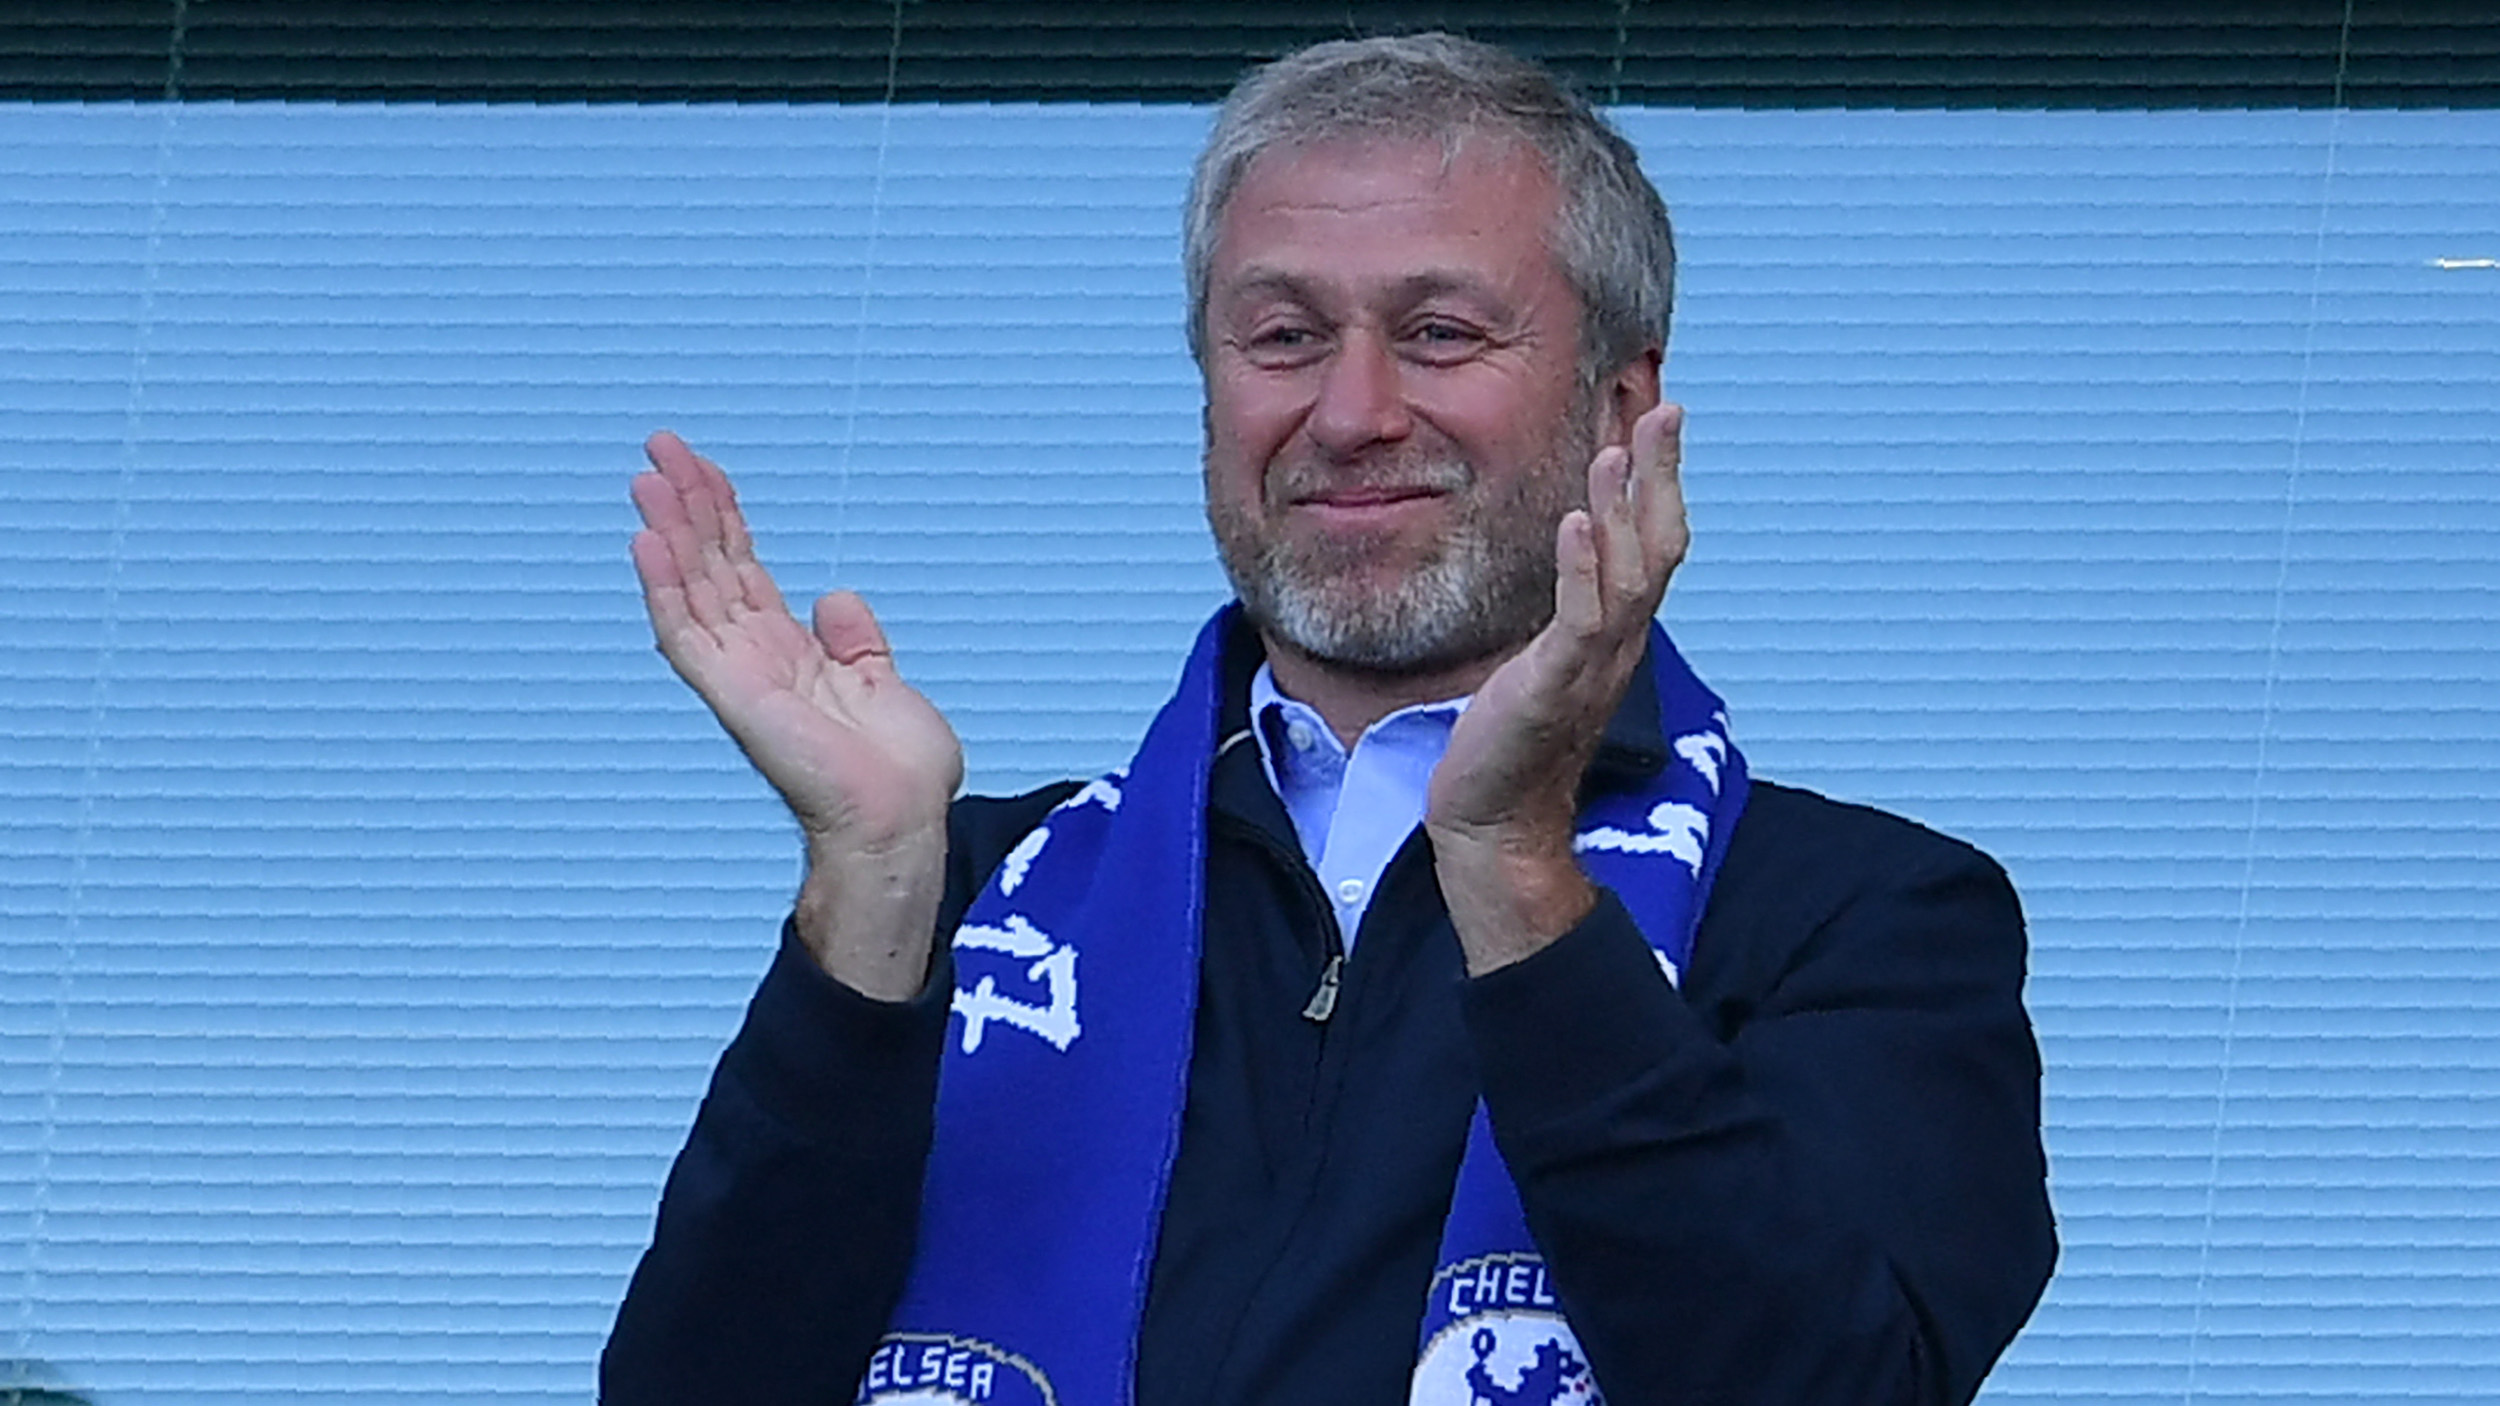 Russian oligarch Roman Abramovich, shown here at a “football” match in 2017, experienced symptoms of poisoning after meeting with Russia in Kyiv.